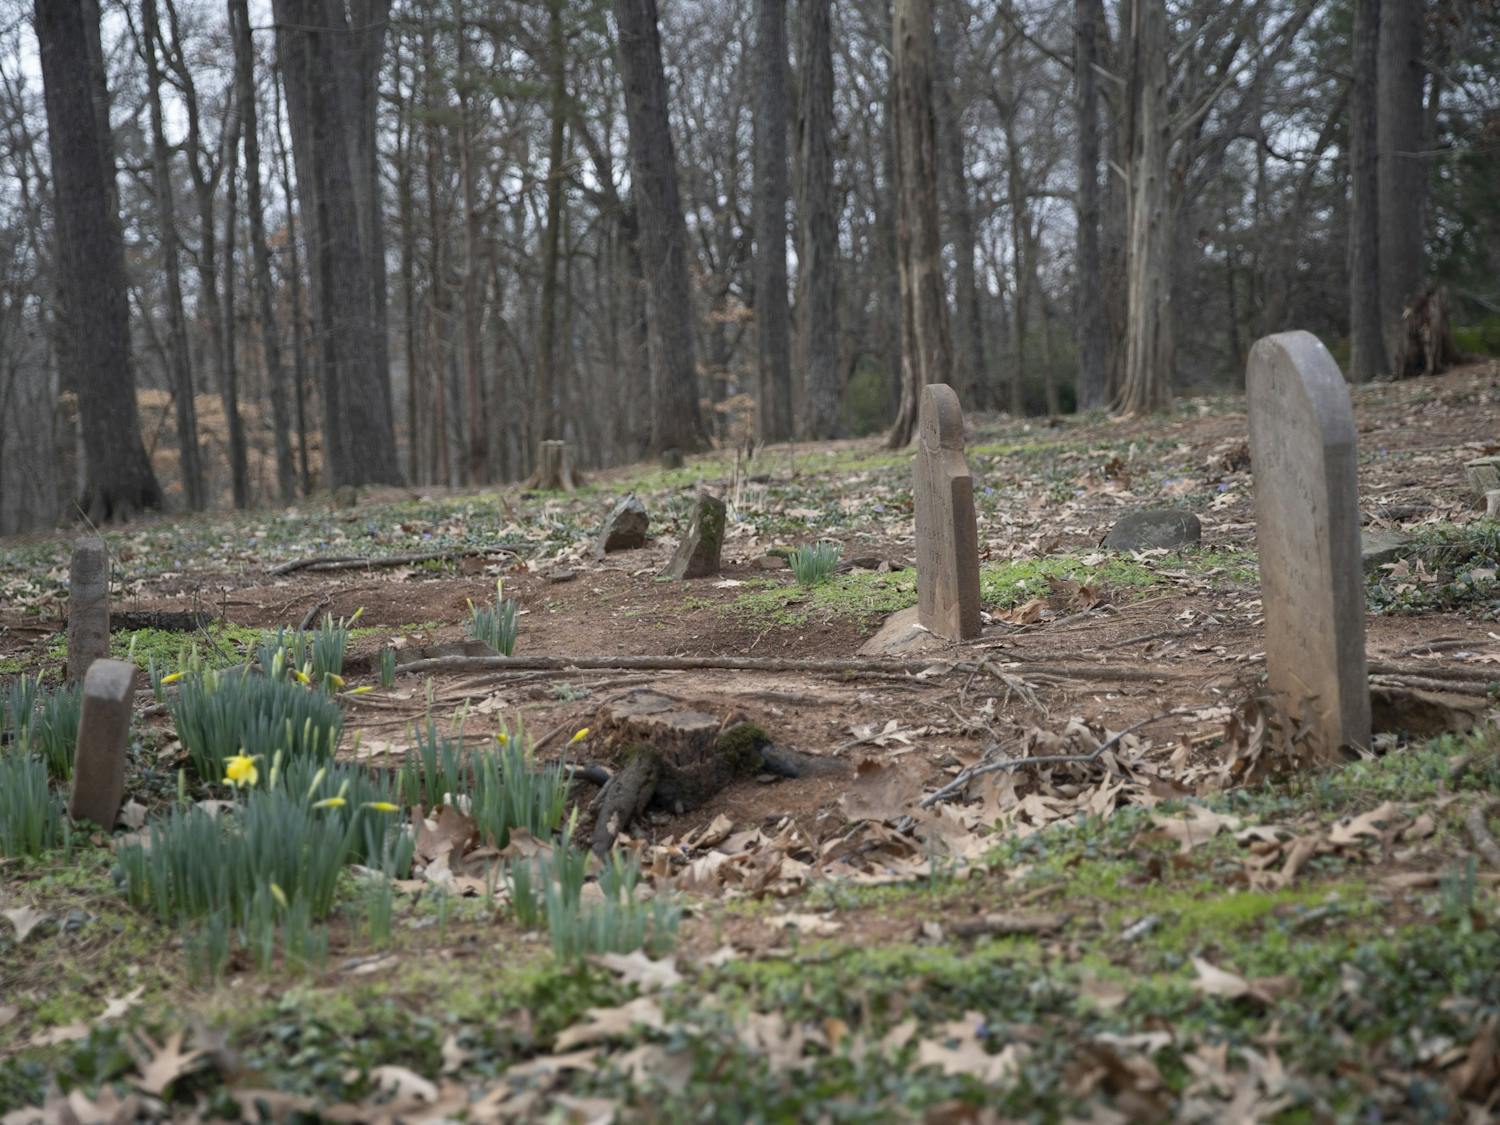 The Christopher and William Barbee Family Cemetery pictured on Jan. 24, 2020. The cemetery was active in the 18th and 19th century and where William Barbee and his relatives were buried. Nearly 100 enslaved people are buried in unmarked graves.